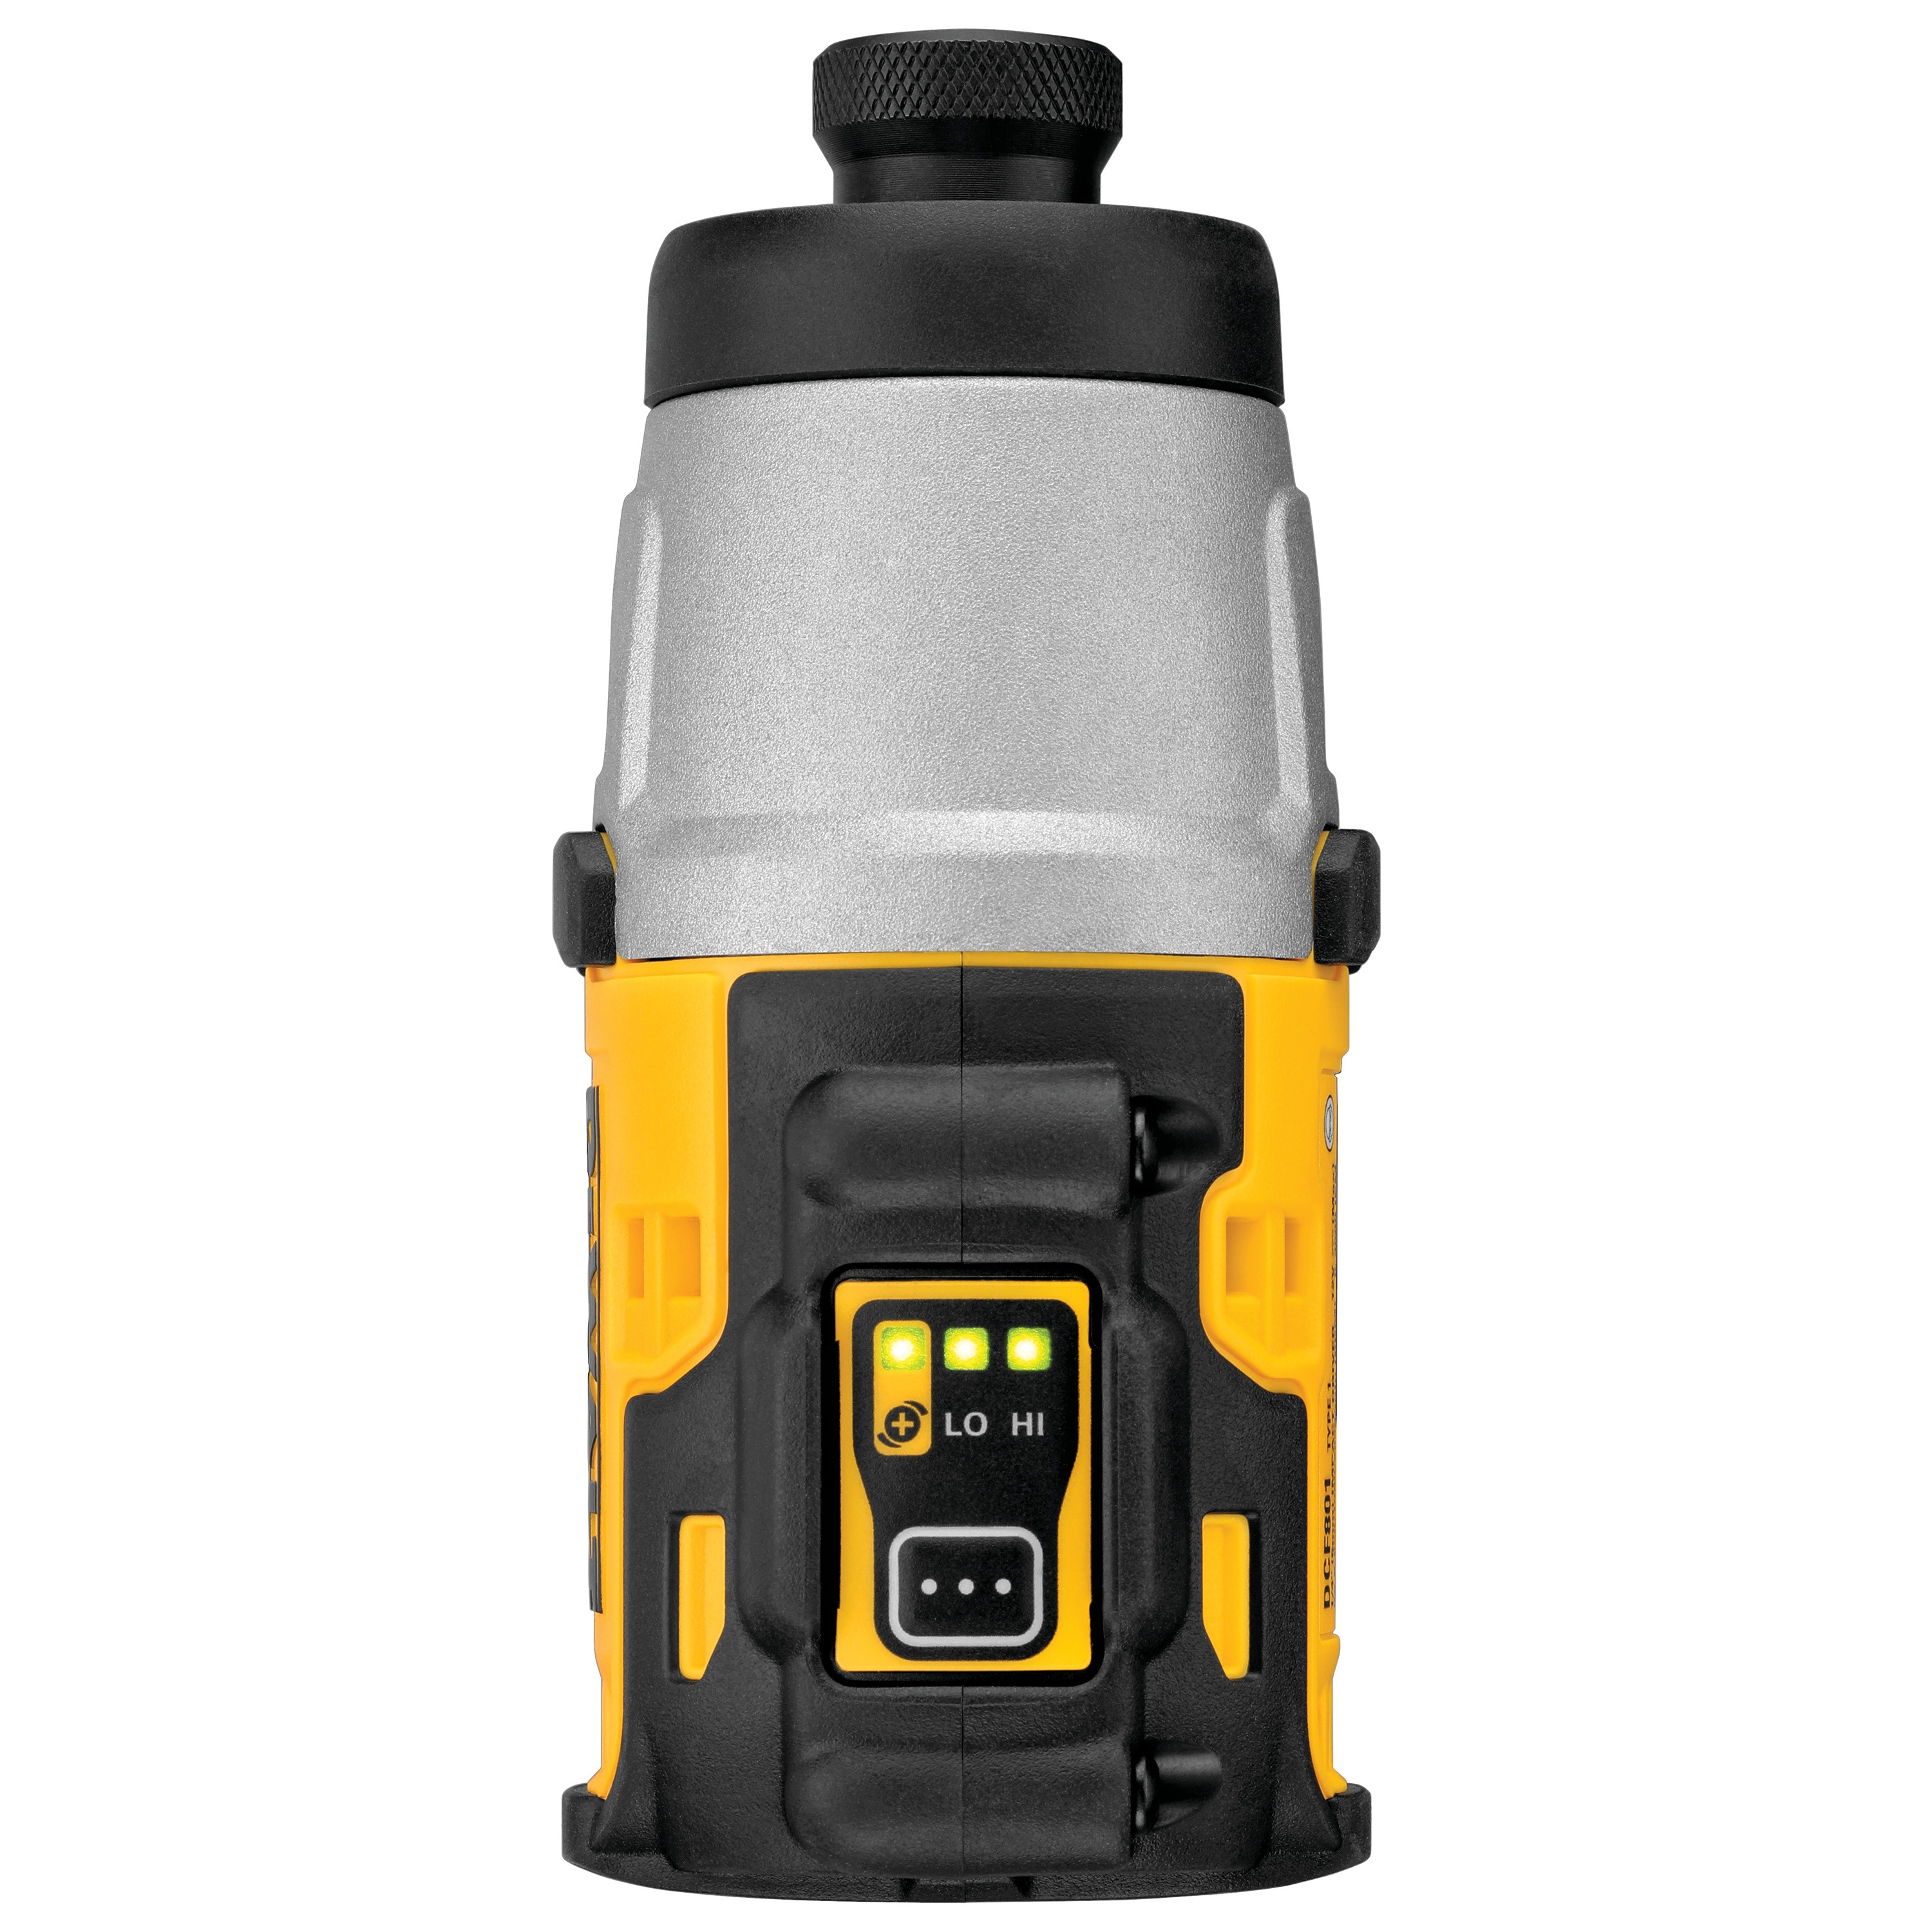 State of charge indicator of batteries feature of XTREME Brushless cordless impact driver.